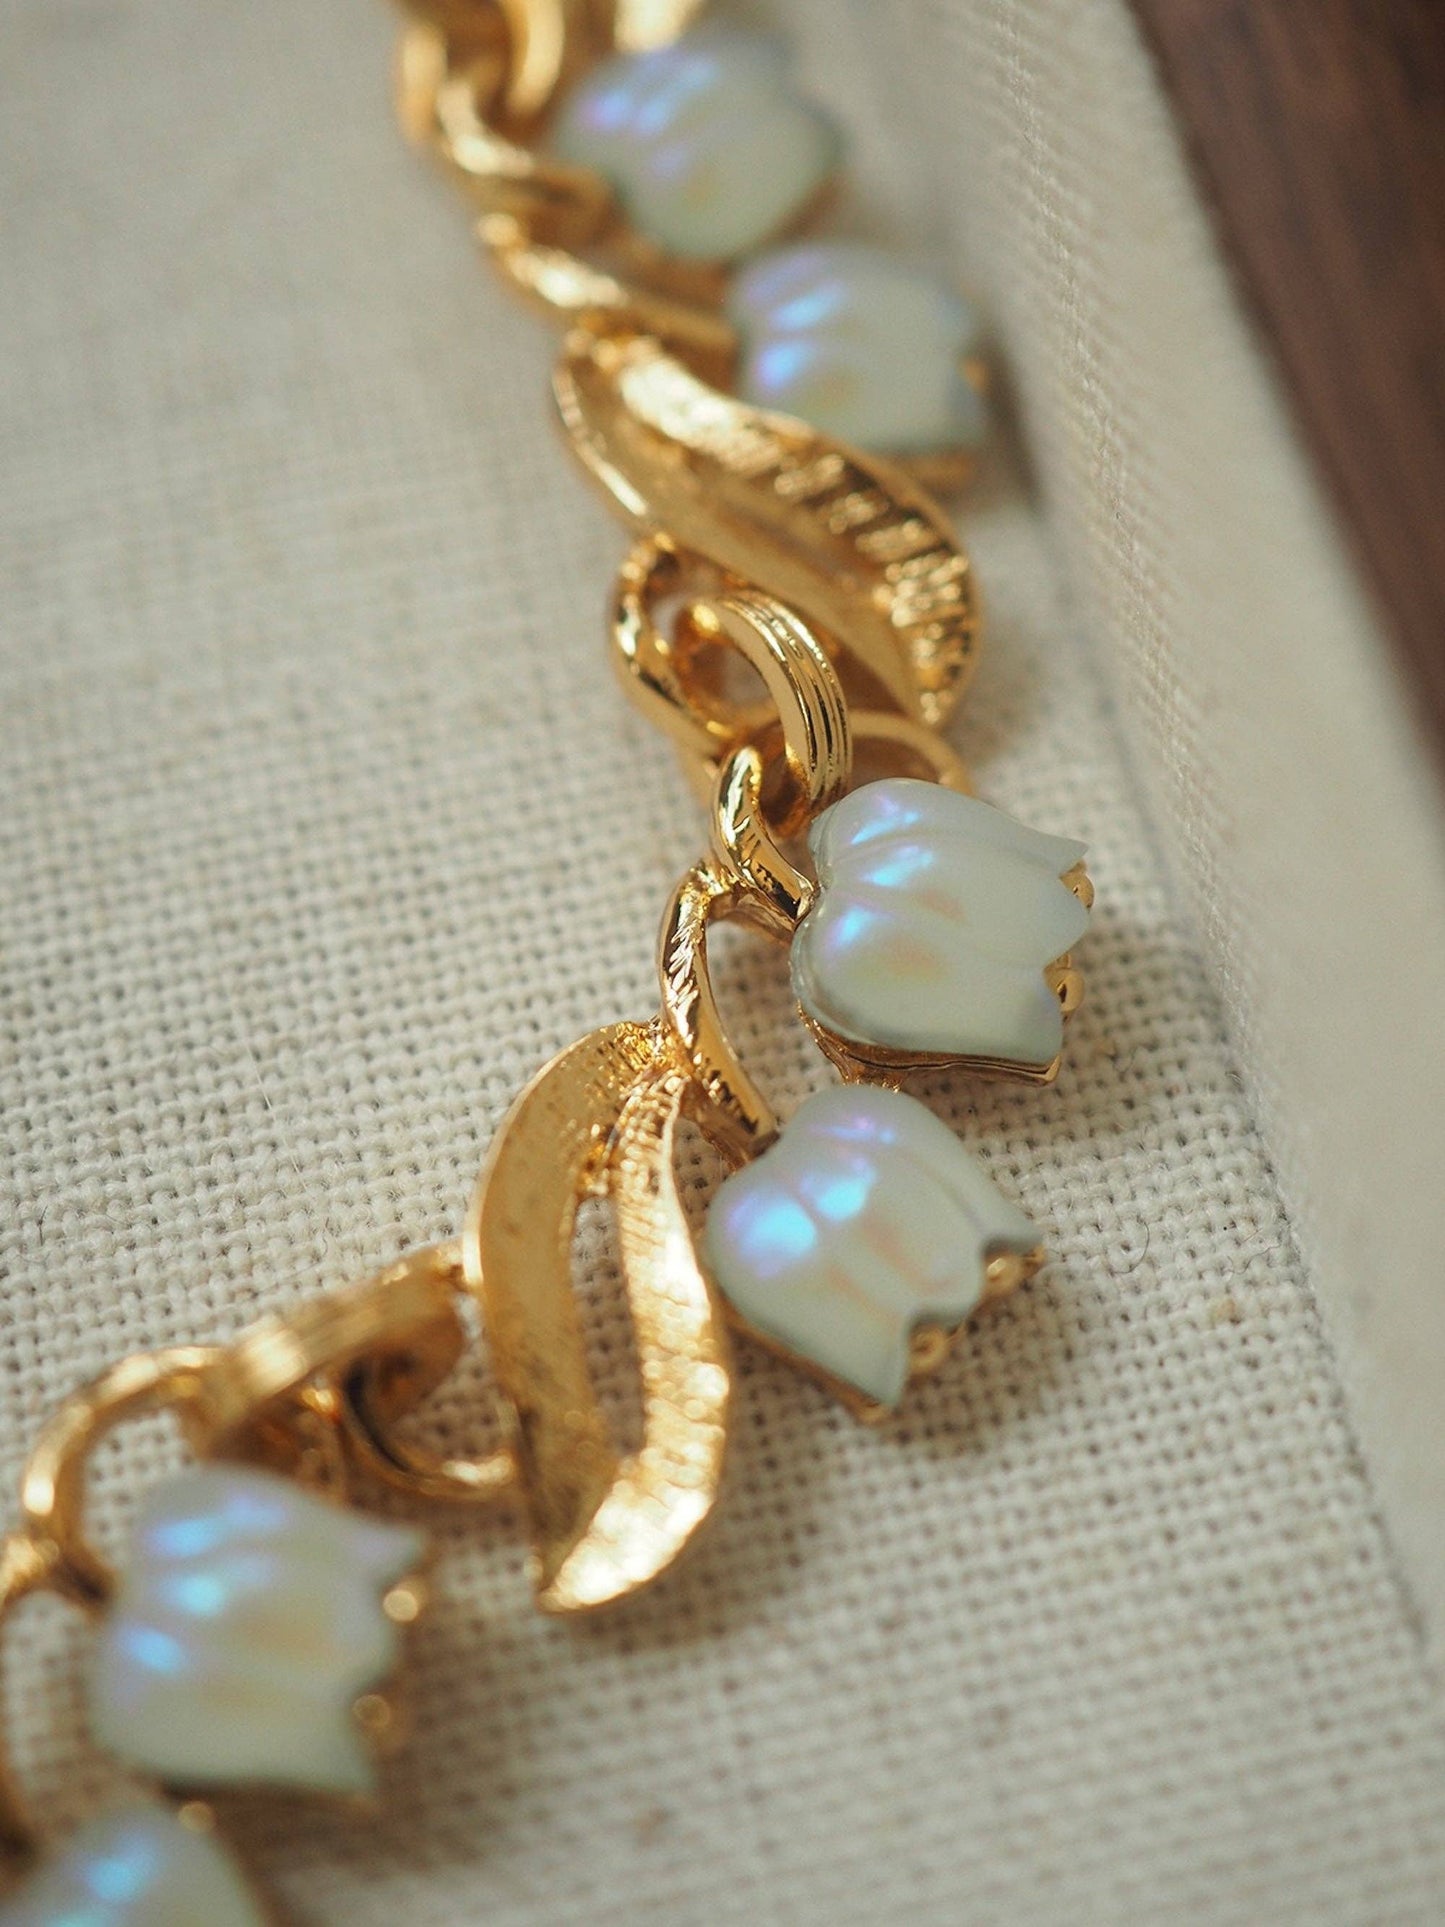 Moonlight Muguet - Vintage Lily of the Valley necklace